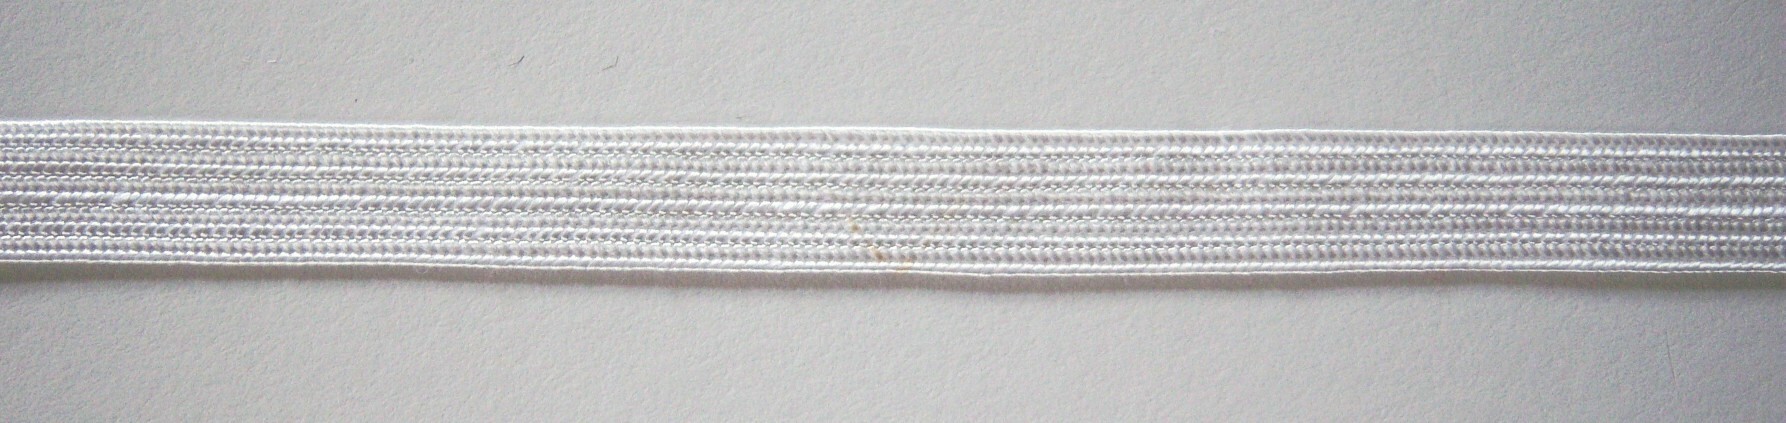 Natural White 3/8" Middy Braid